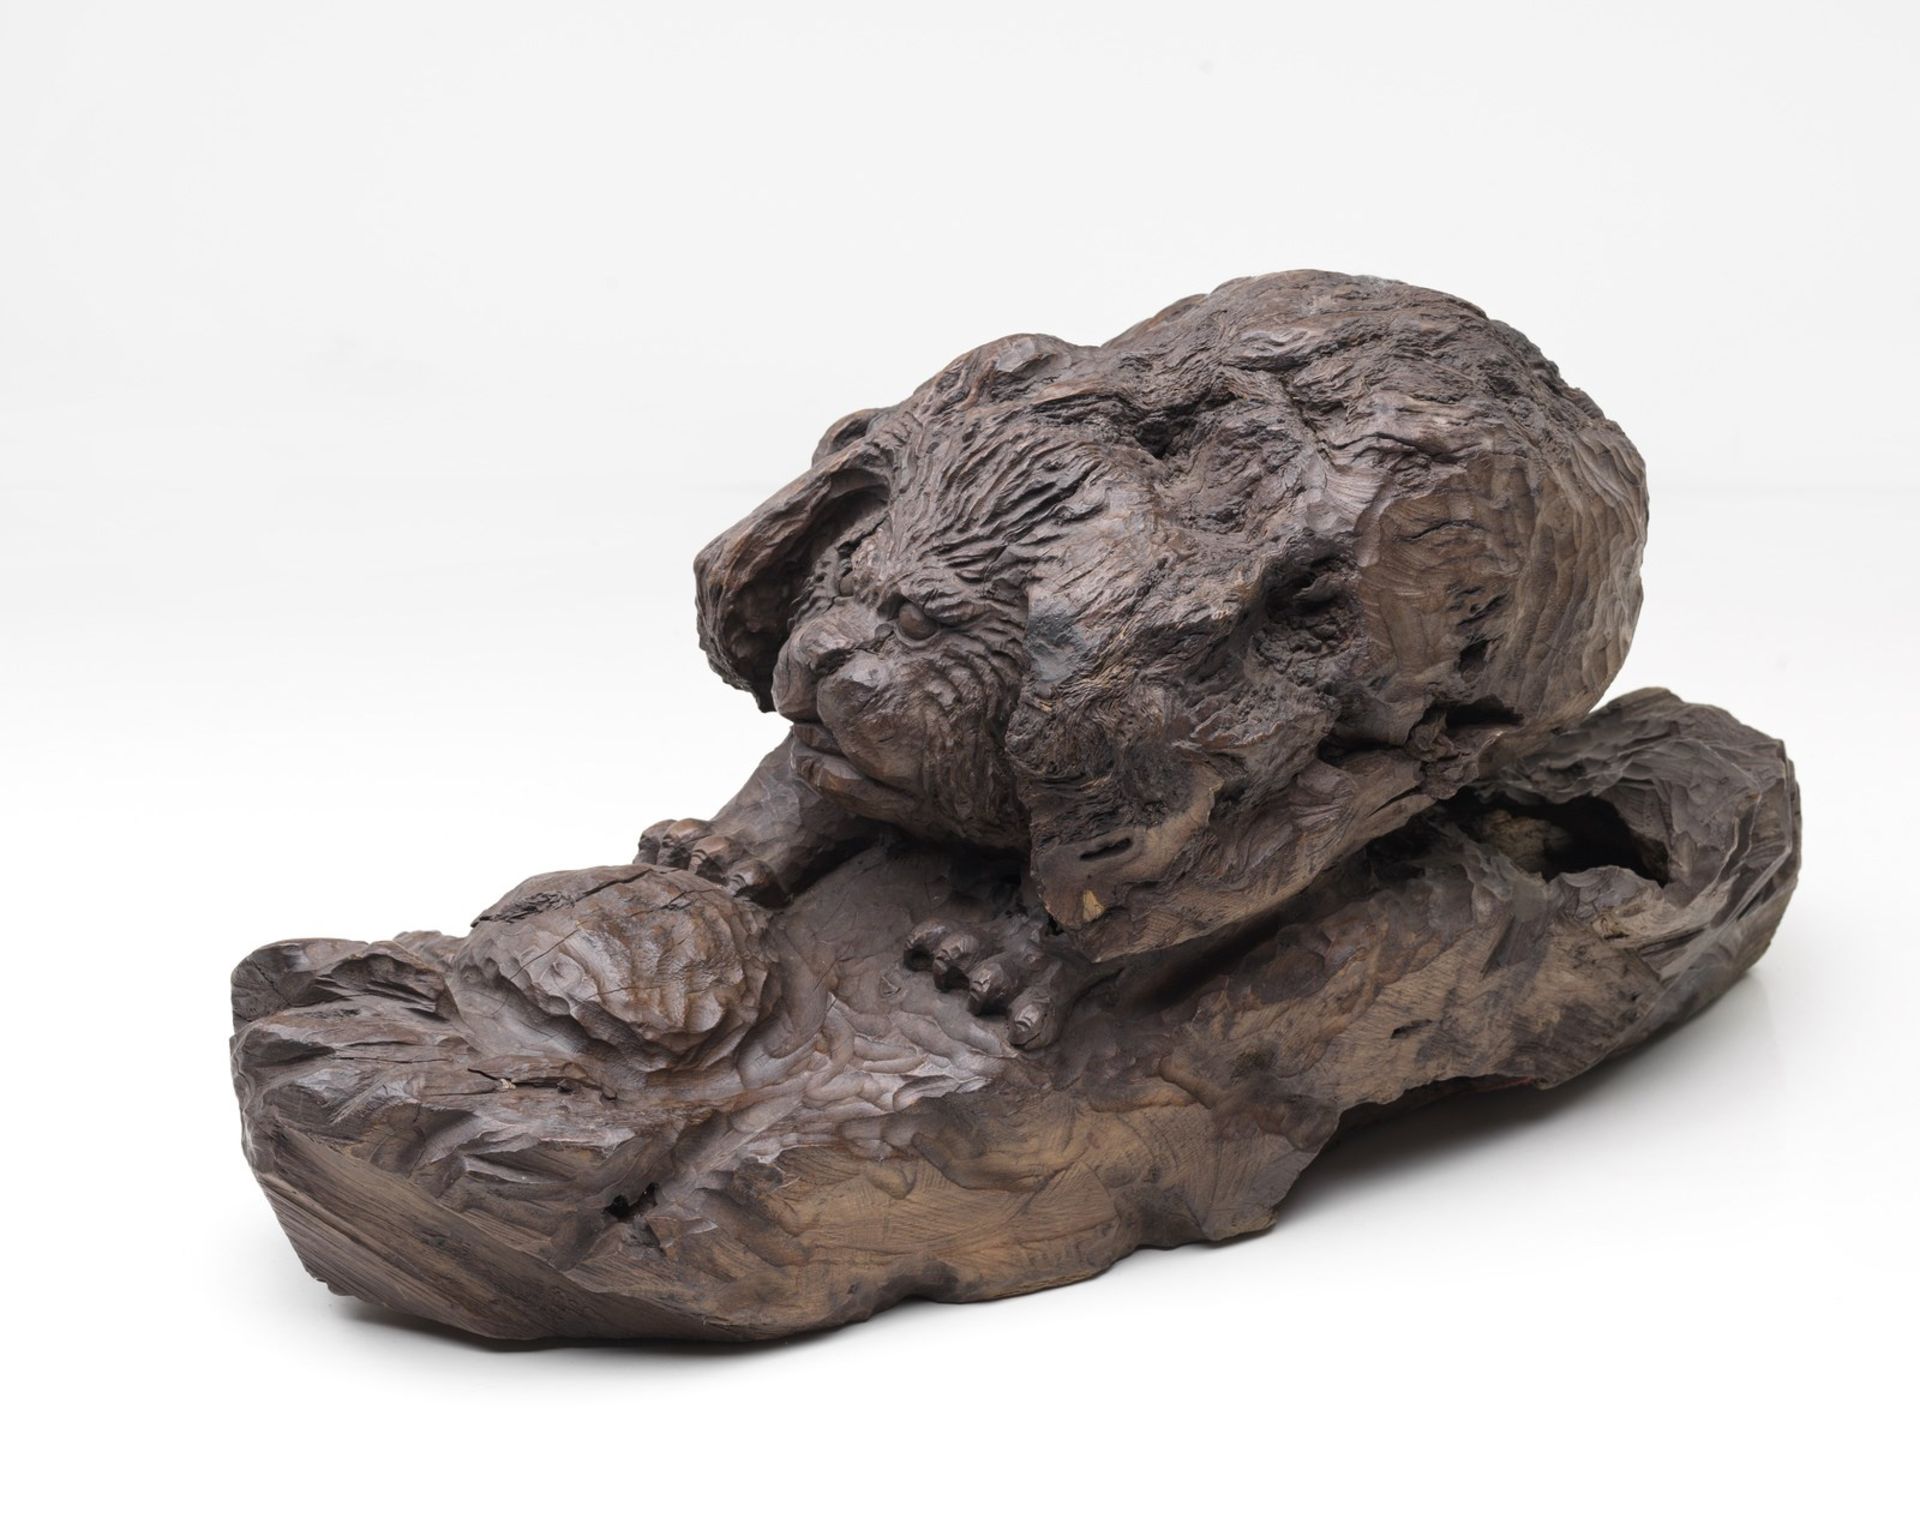 Naturalia A wooden root carved with the head of a snow lionTibet, 19th century. - Image 3 of 5